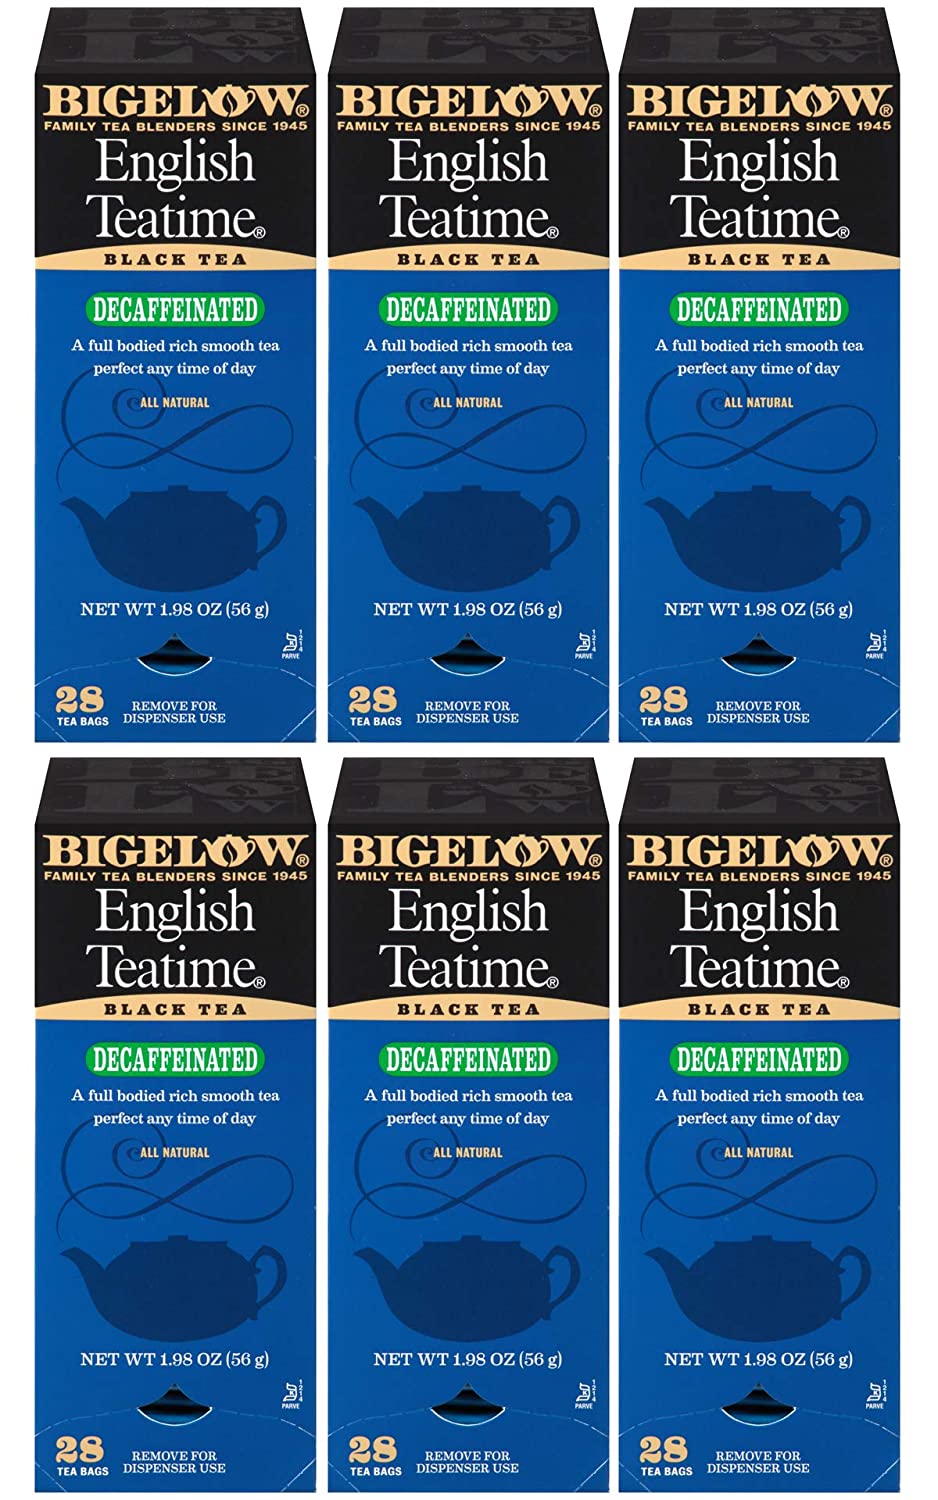 Bigelow Decaffeinated English Teatime Tea 28-Count Boxes (Pack of 6) Premium Bagged Caffeine-Free Black Tea Antioxidant-Rich All Natural Decaffeinated Tea in Individual Foil-Wrapped Bags6